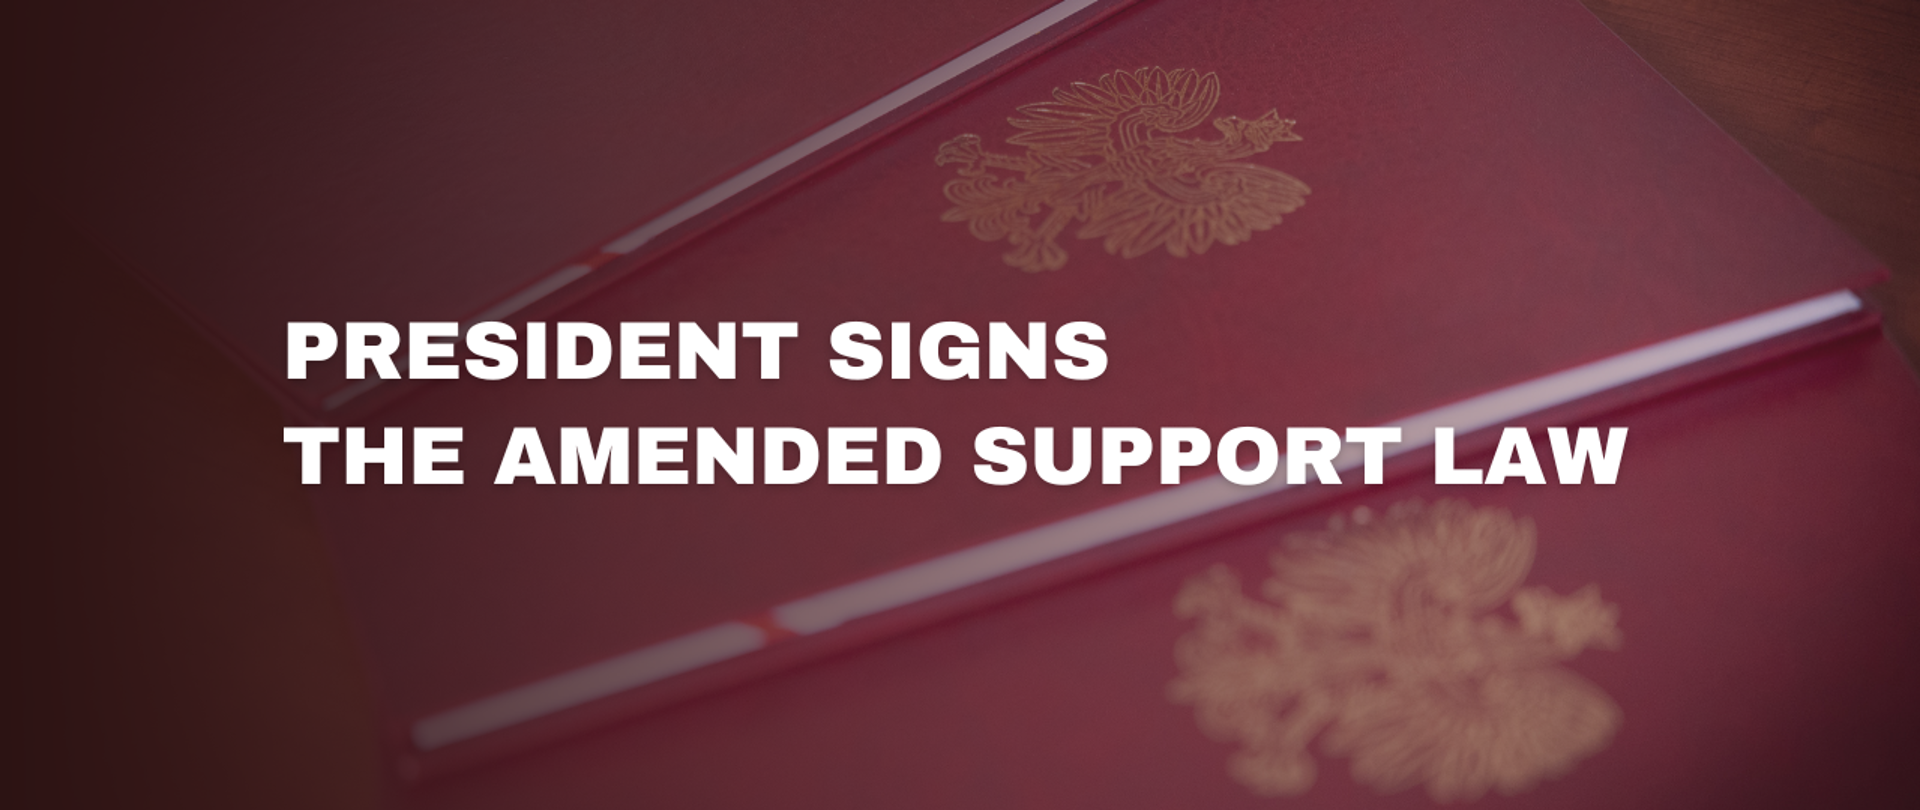 President signs the amended support law